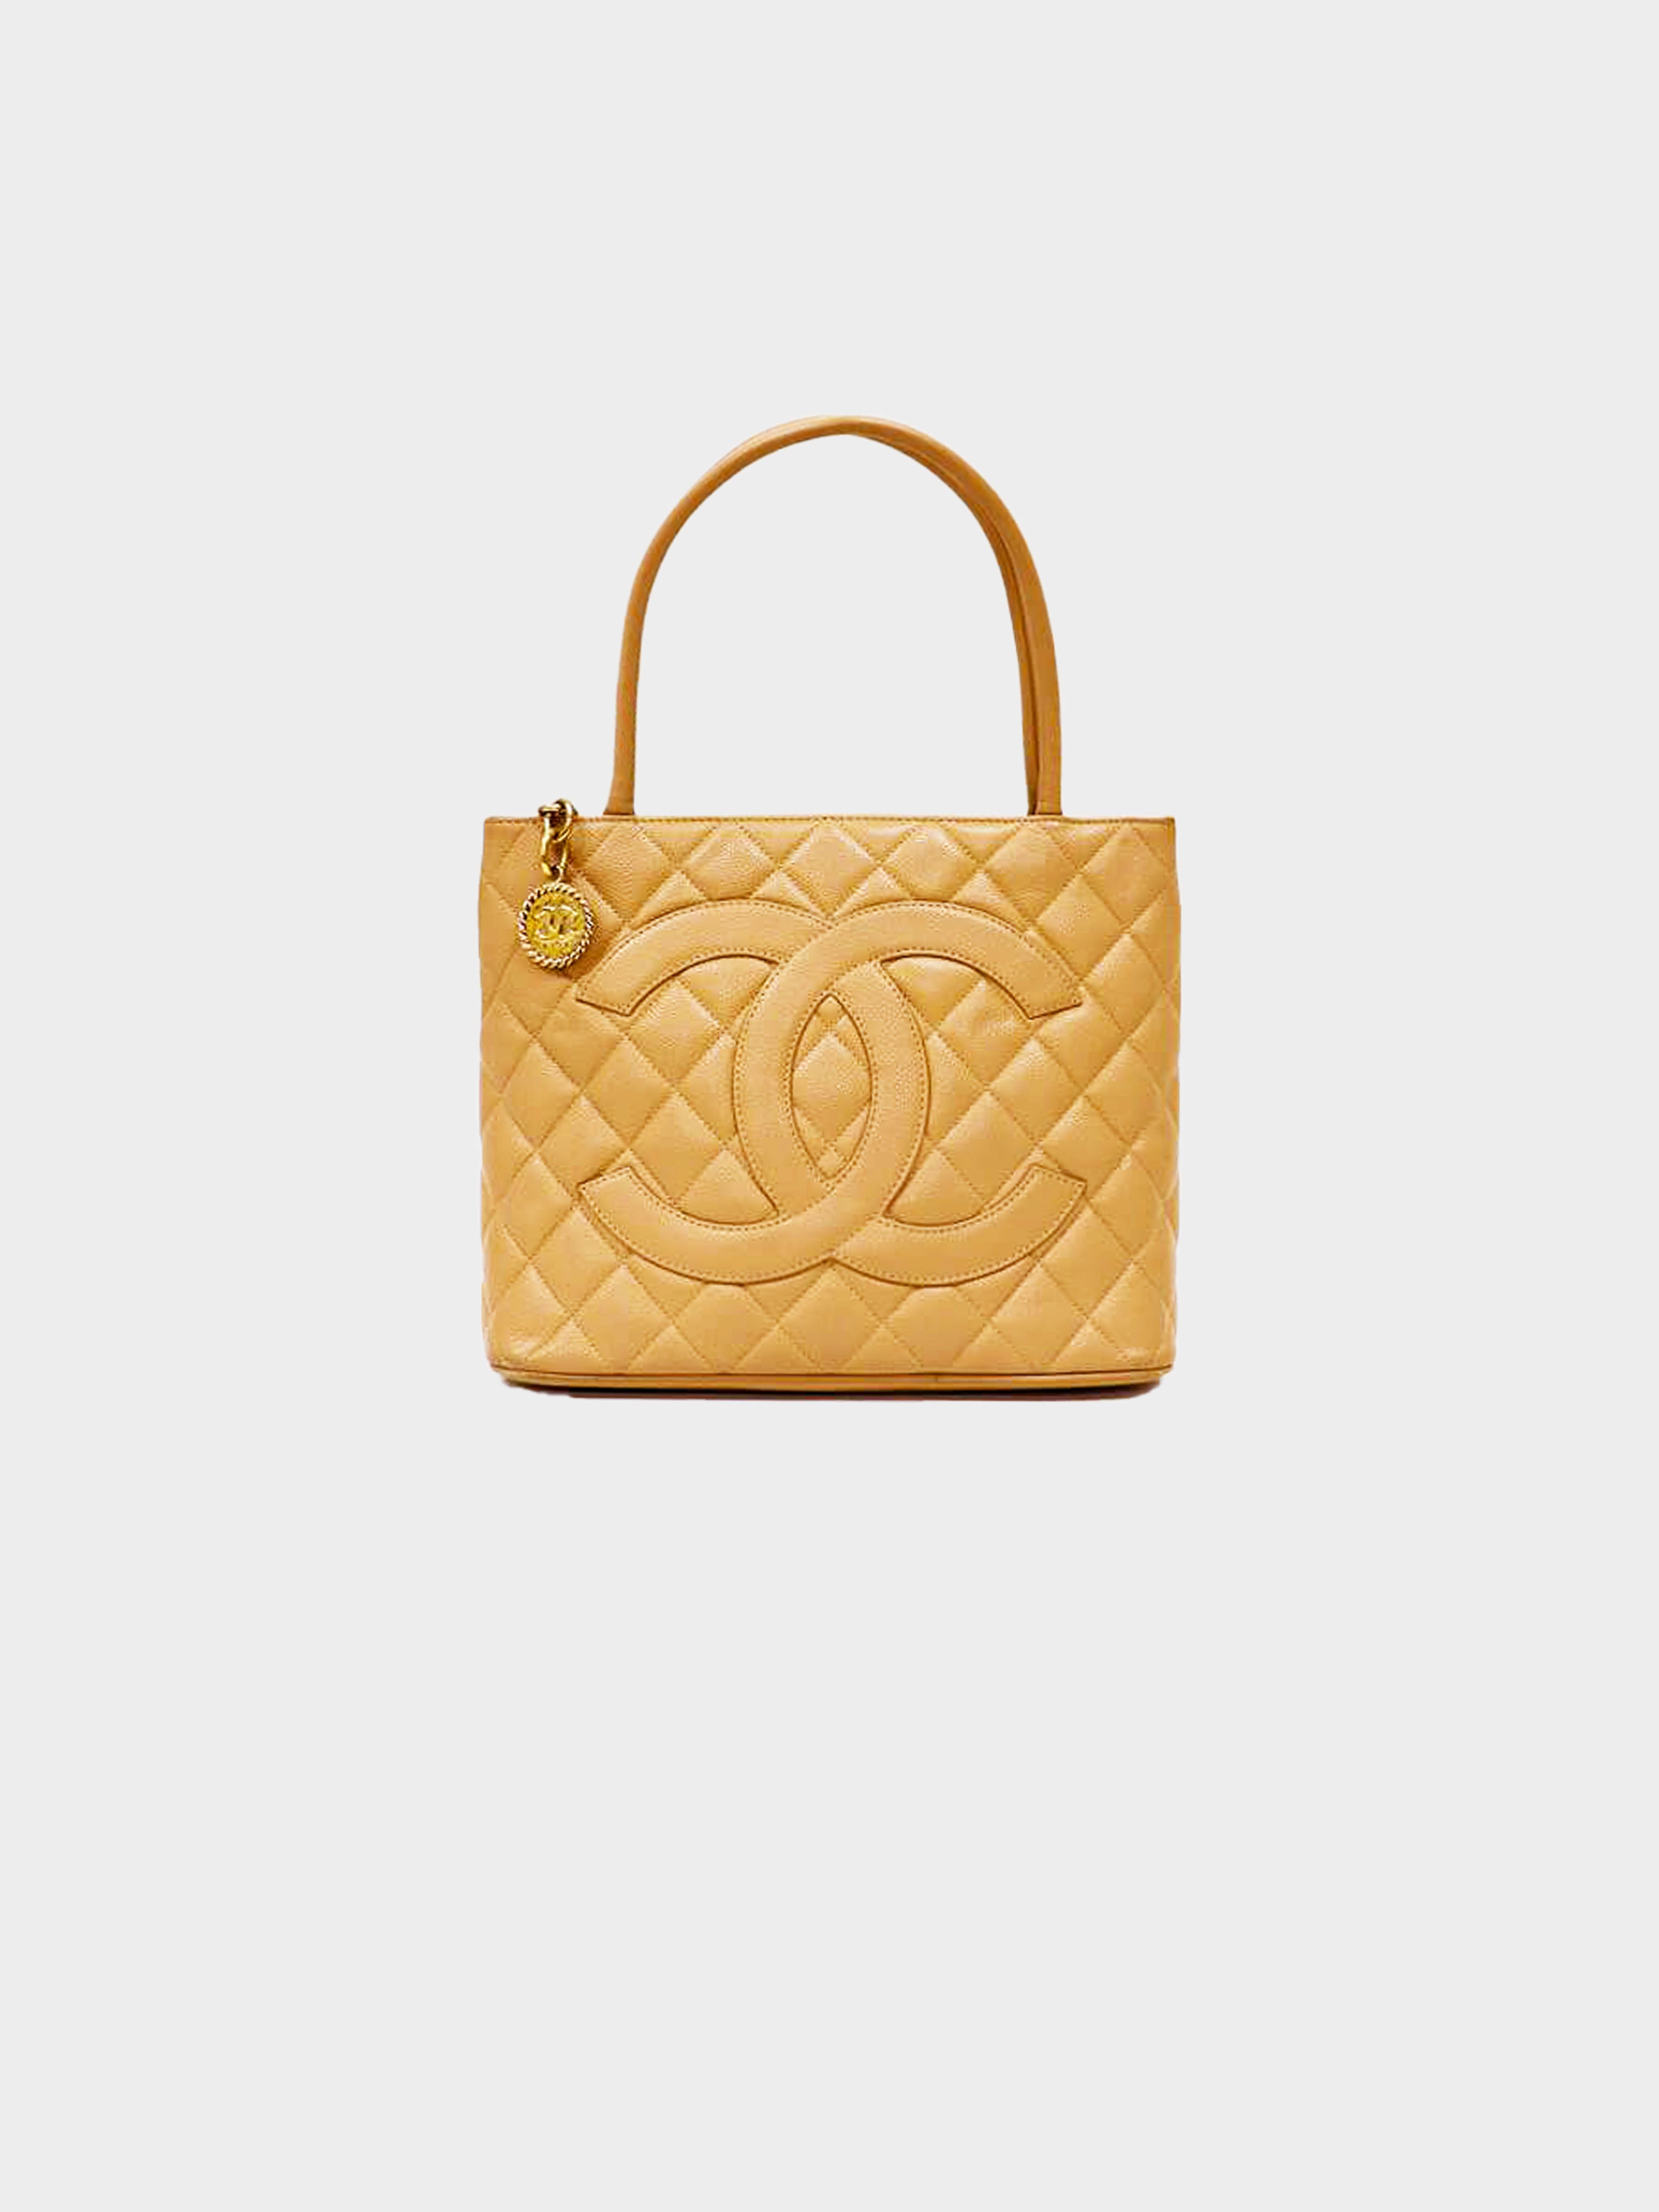 how much is a big chanel bag